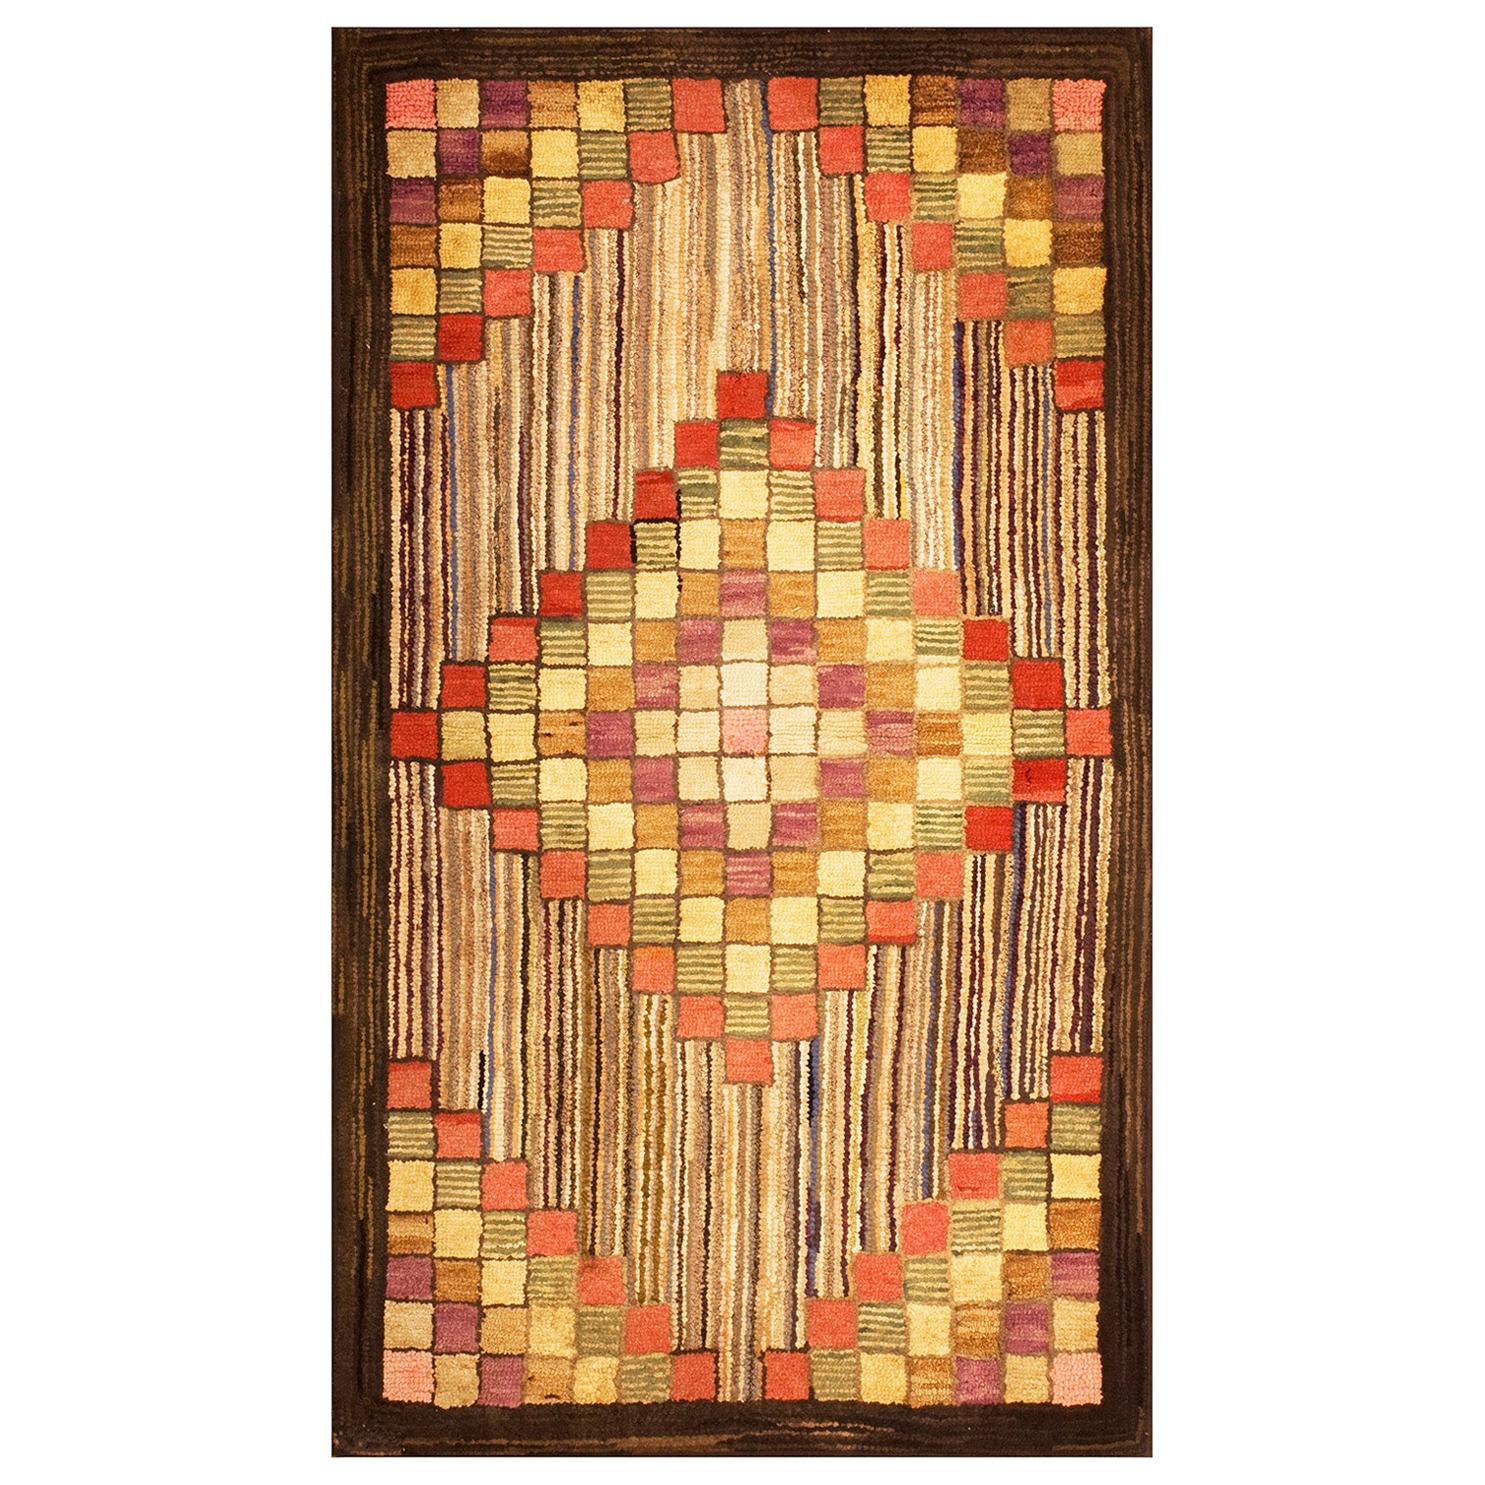 Antique American Hooked Rug 3' 0" x 5' 0" For Sale